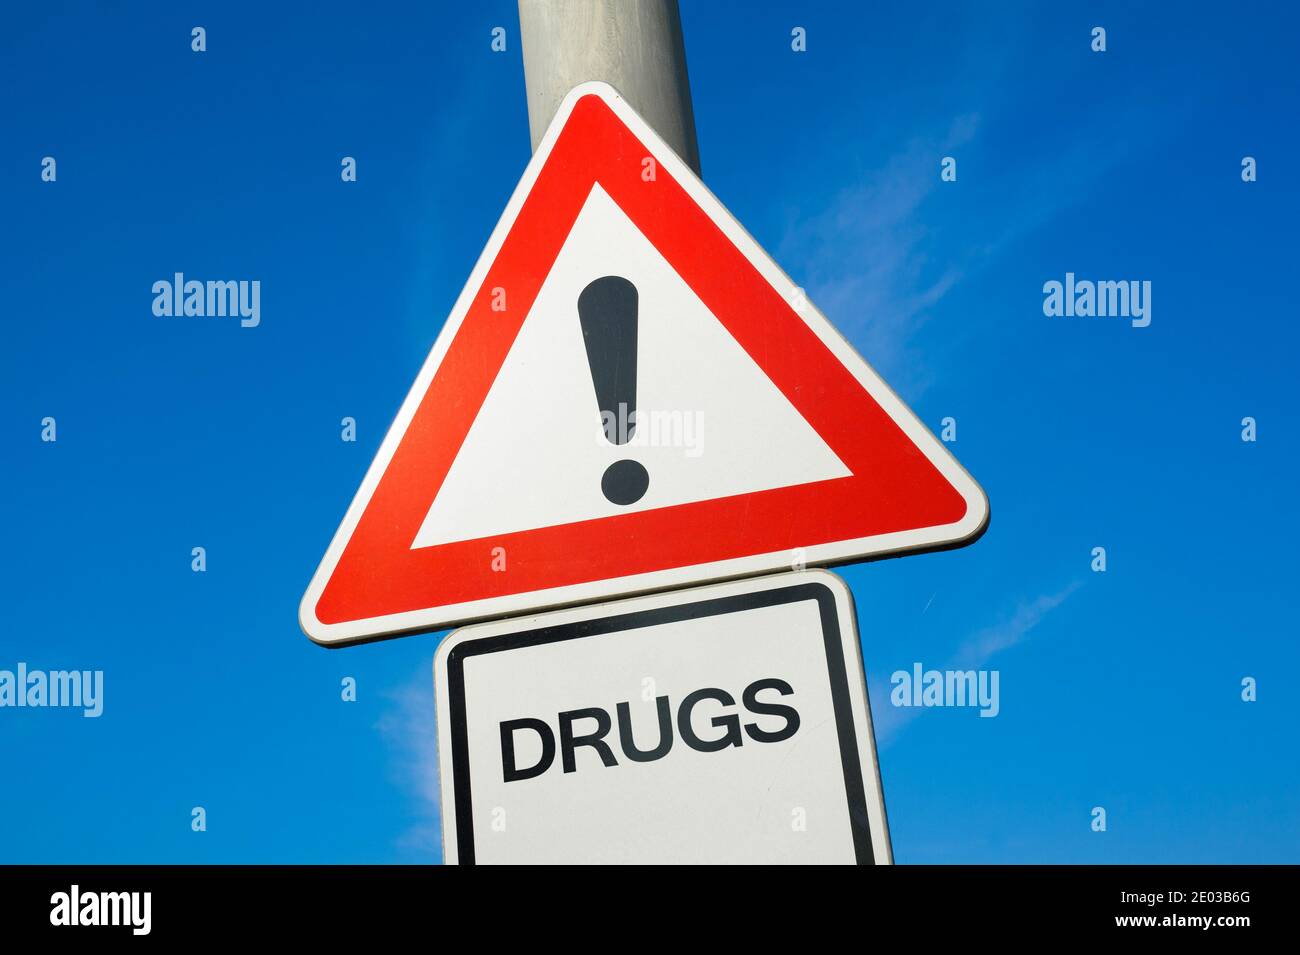 Drugs - traffic sign with exclamation mark to alert, warn caution - substance abuse and misuse leading to addiction and being addict Stock Photo